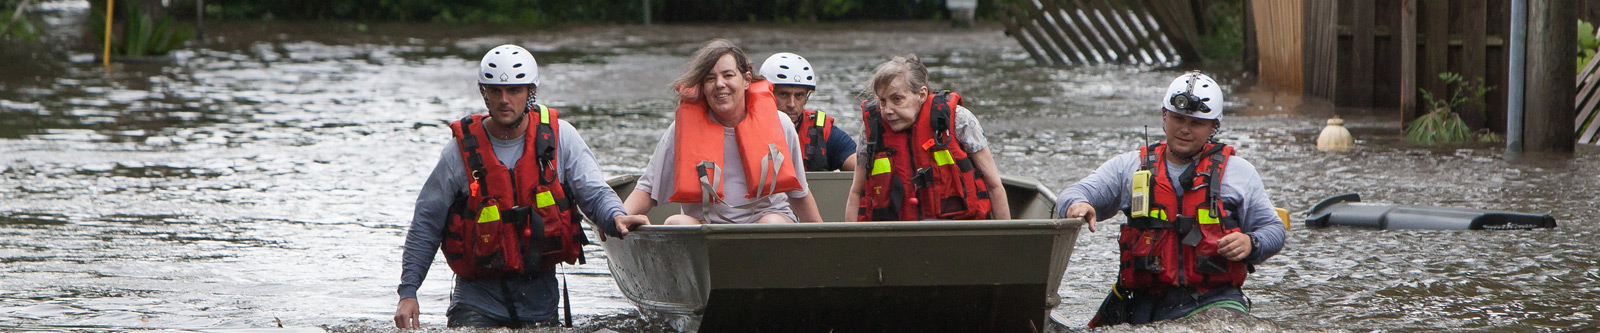 Rescuers guiding a boat with two women through deep water